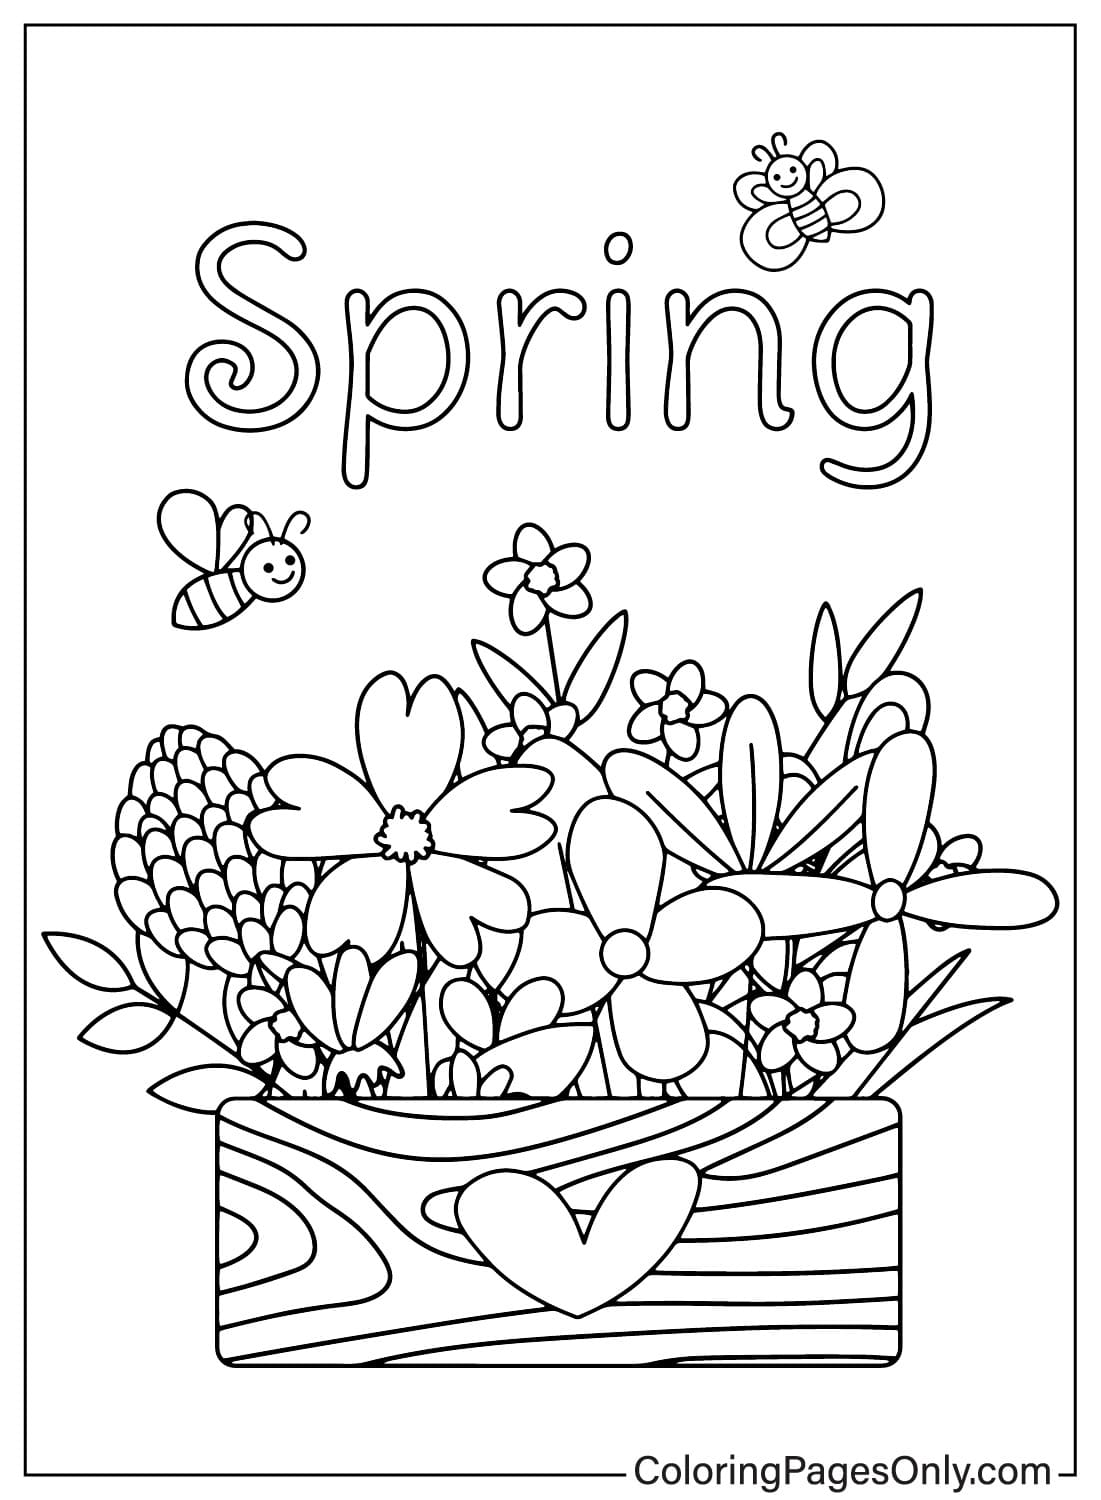 Spring Flower Basket Coloring Page from First Day of Spring